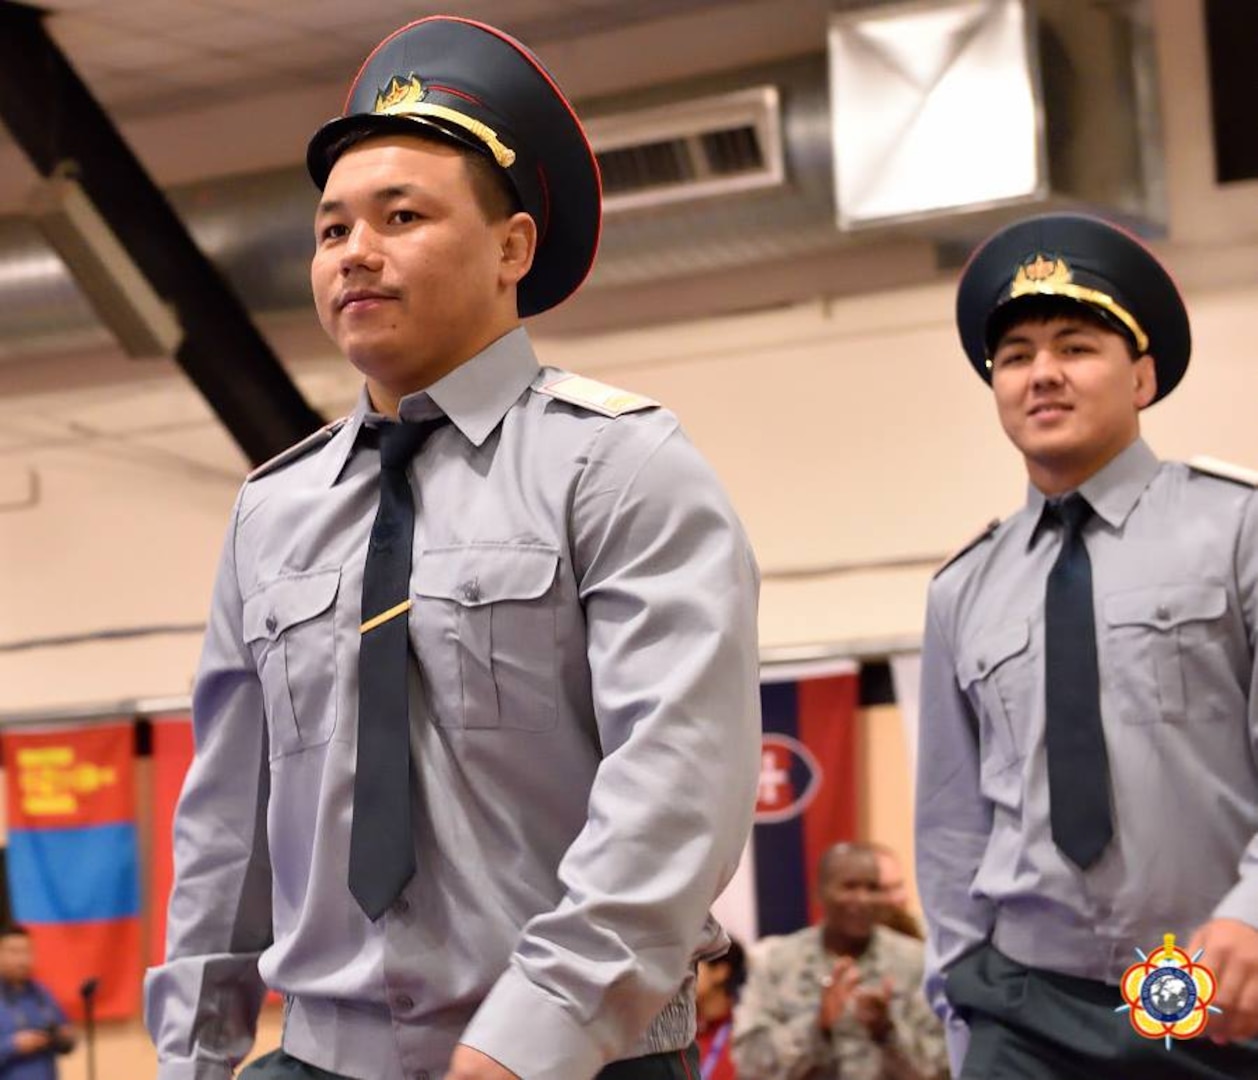 Members of the Kazakhstan Delegation during the Opening Ceremony of the 29th CISM World Military Wrestling Championship at Joint Base McGuire-Dix-Lakehurst (MDL), New Jersey 1-8 October